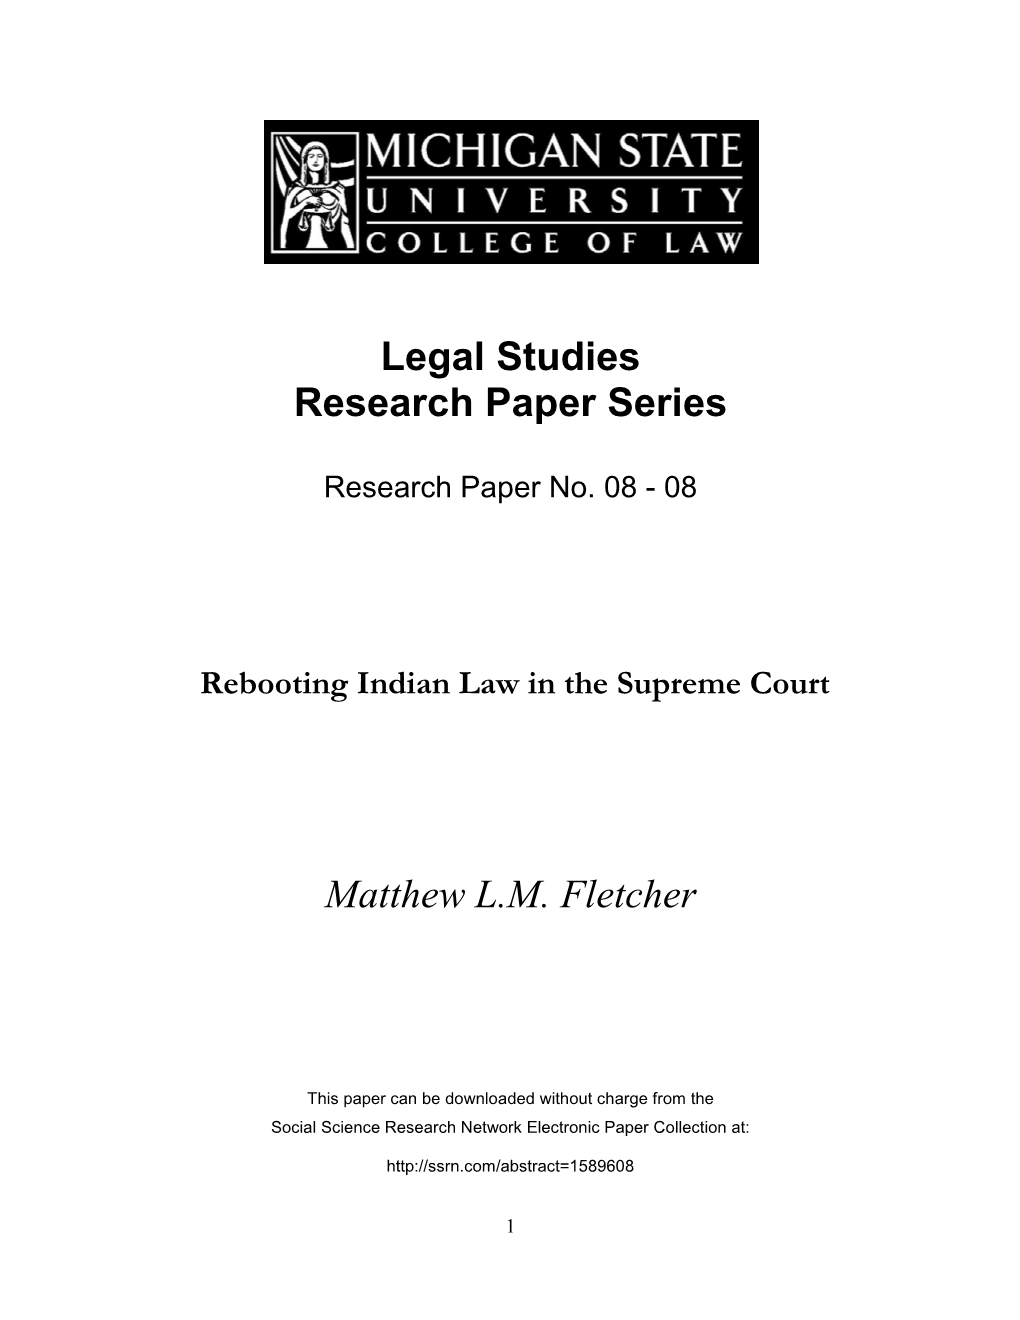 Rebooting Indian Law in the Supreme Court (Fletcher 2010)